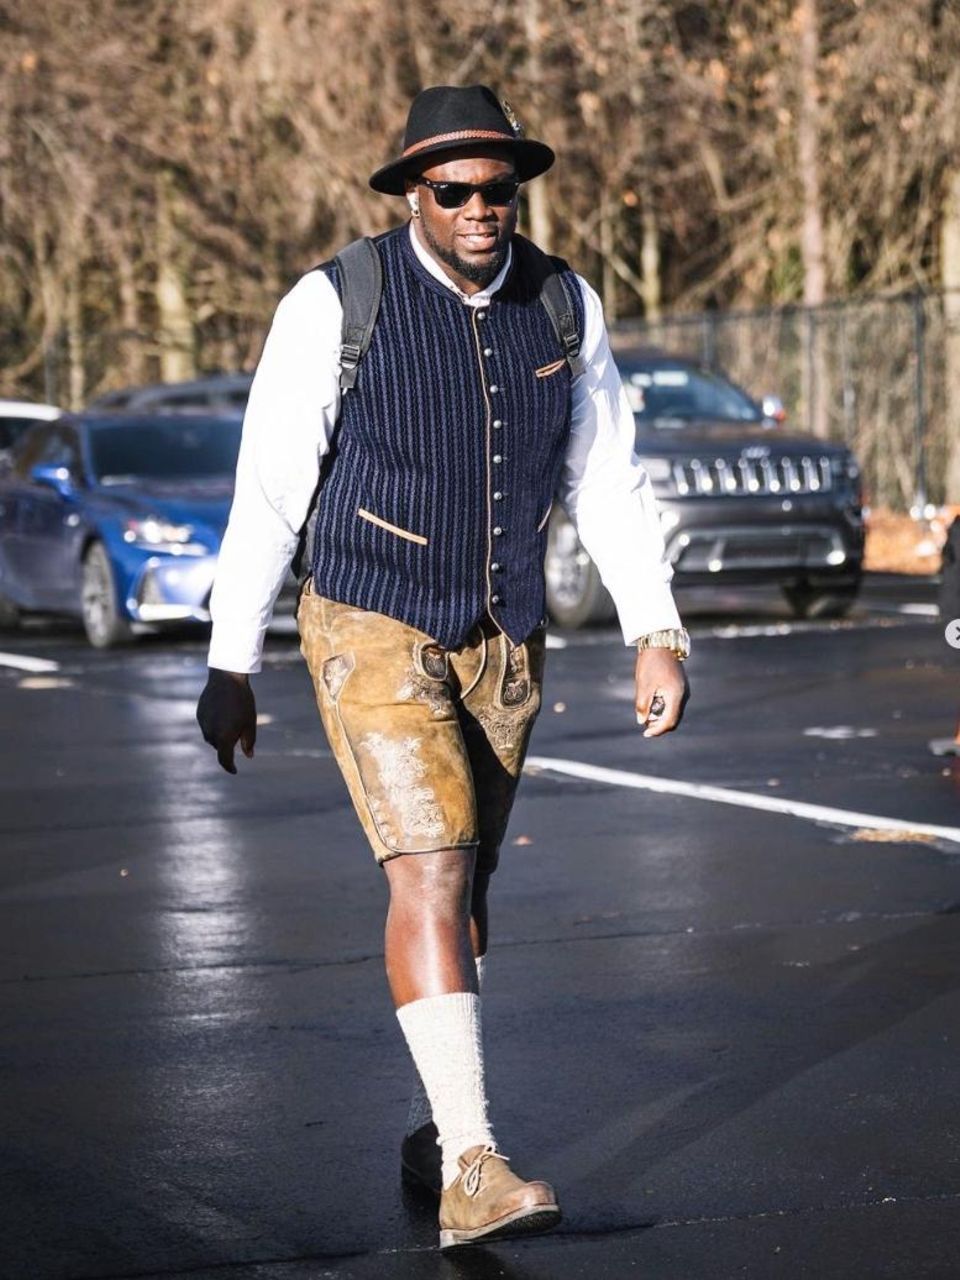 David Bada in Bavarian costume on the occasion of his debut with the NFL